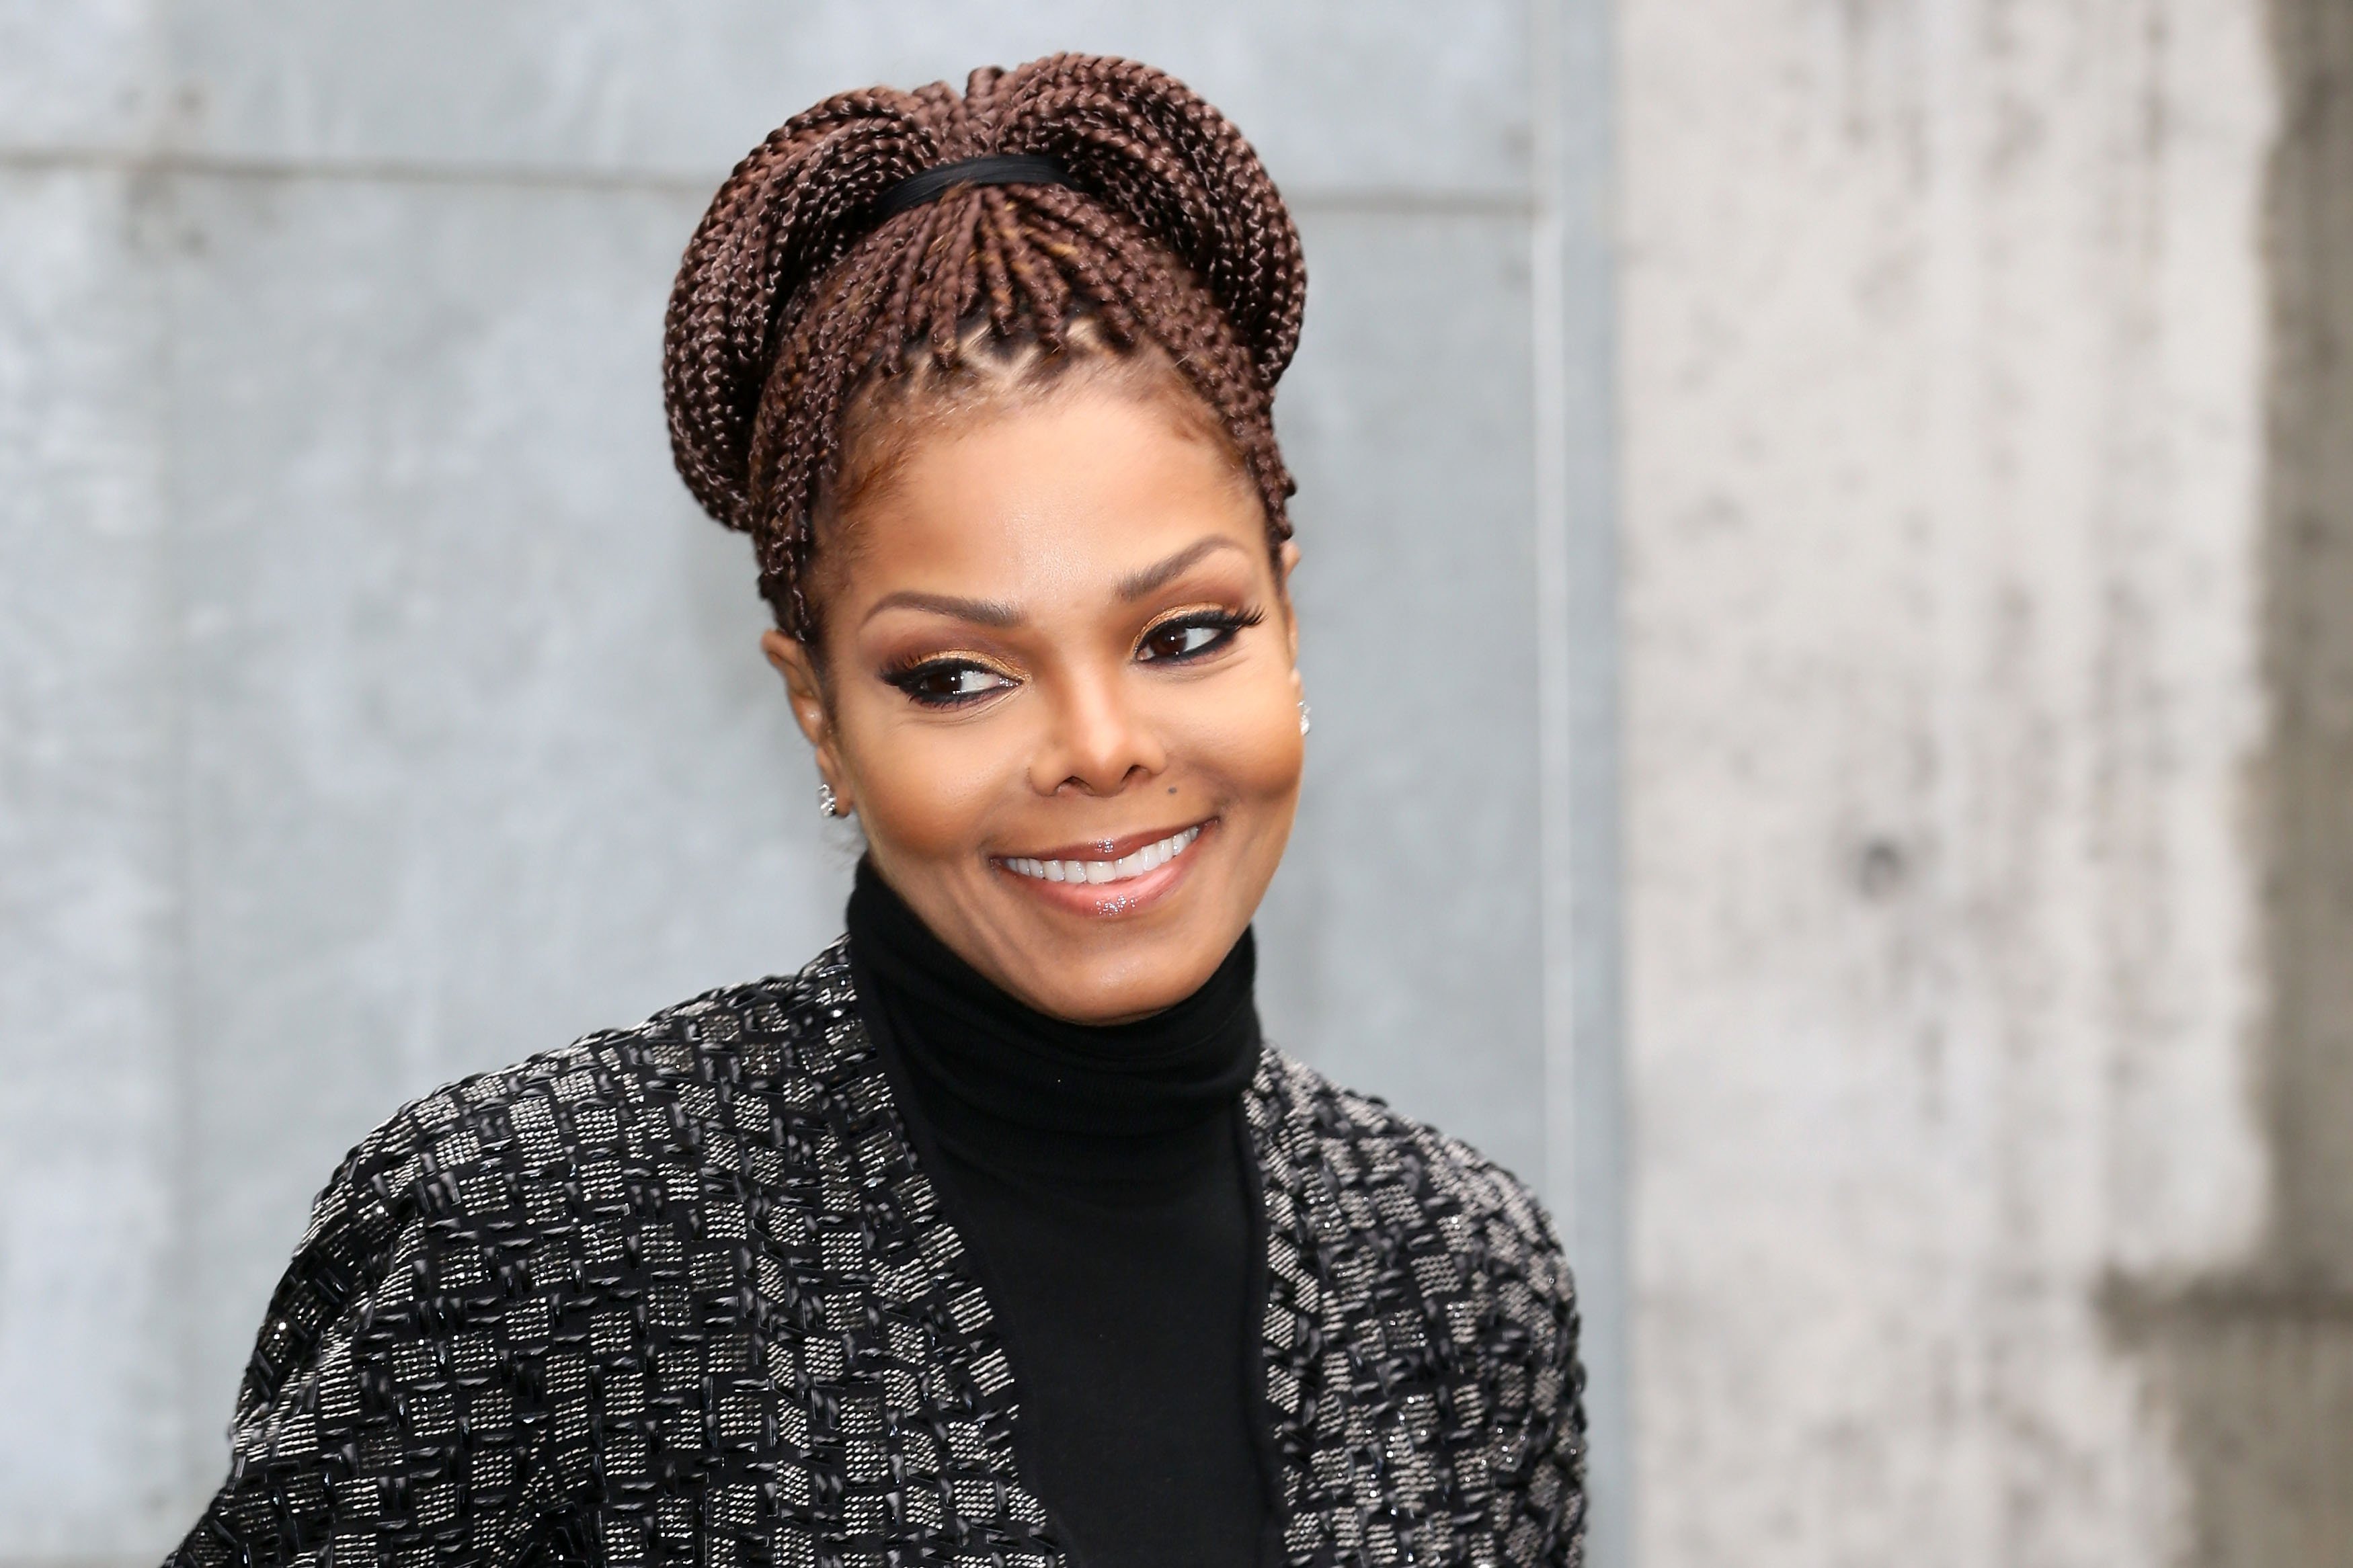 Janet Jackson at the Giorgio Armani fashion show as part of Milan Fashion Week on Feb. 25, 2014 in Italy | Photo: Getty Images